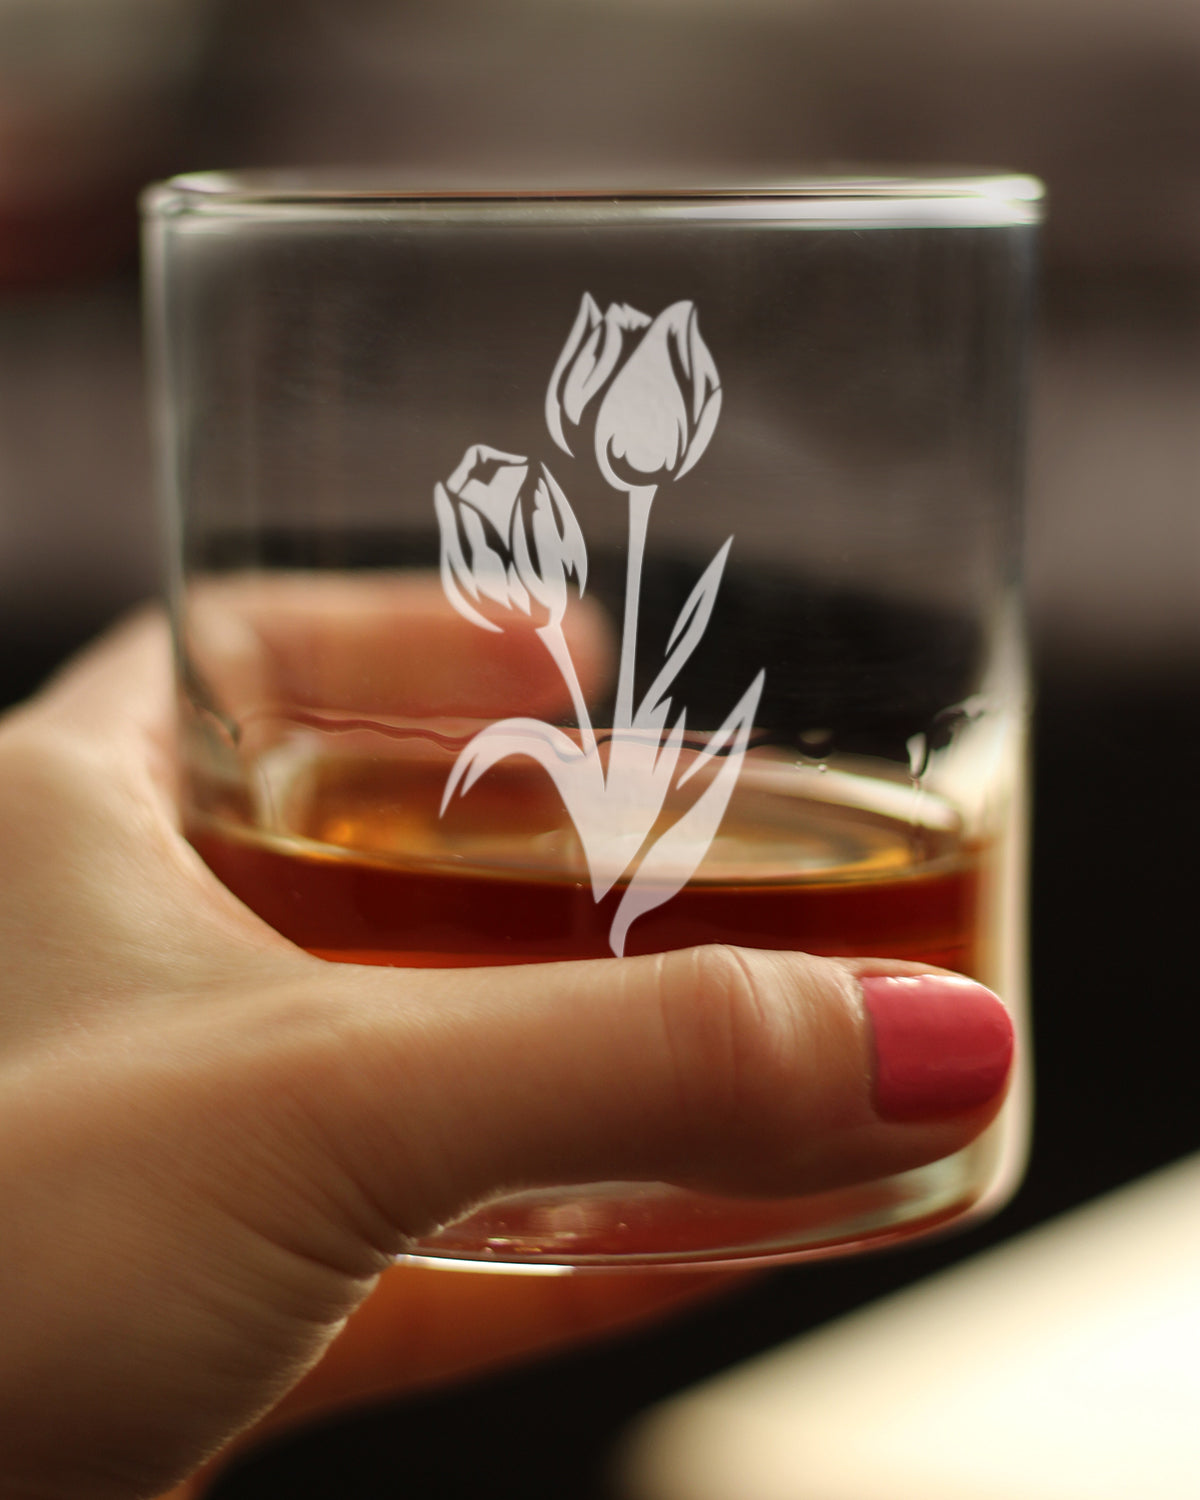 Tulip Whiskey Rocks Glass - Floral Themed Decor and Gifts for Flower Lovers - 10.25 Oz Glasses